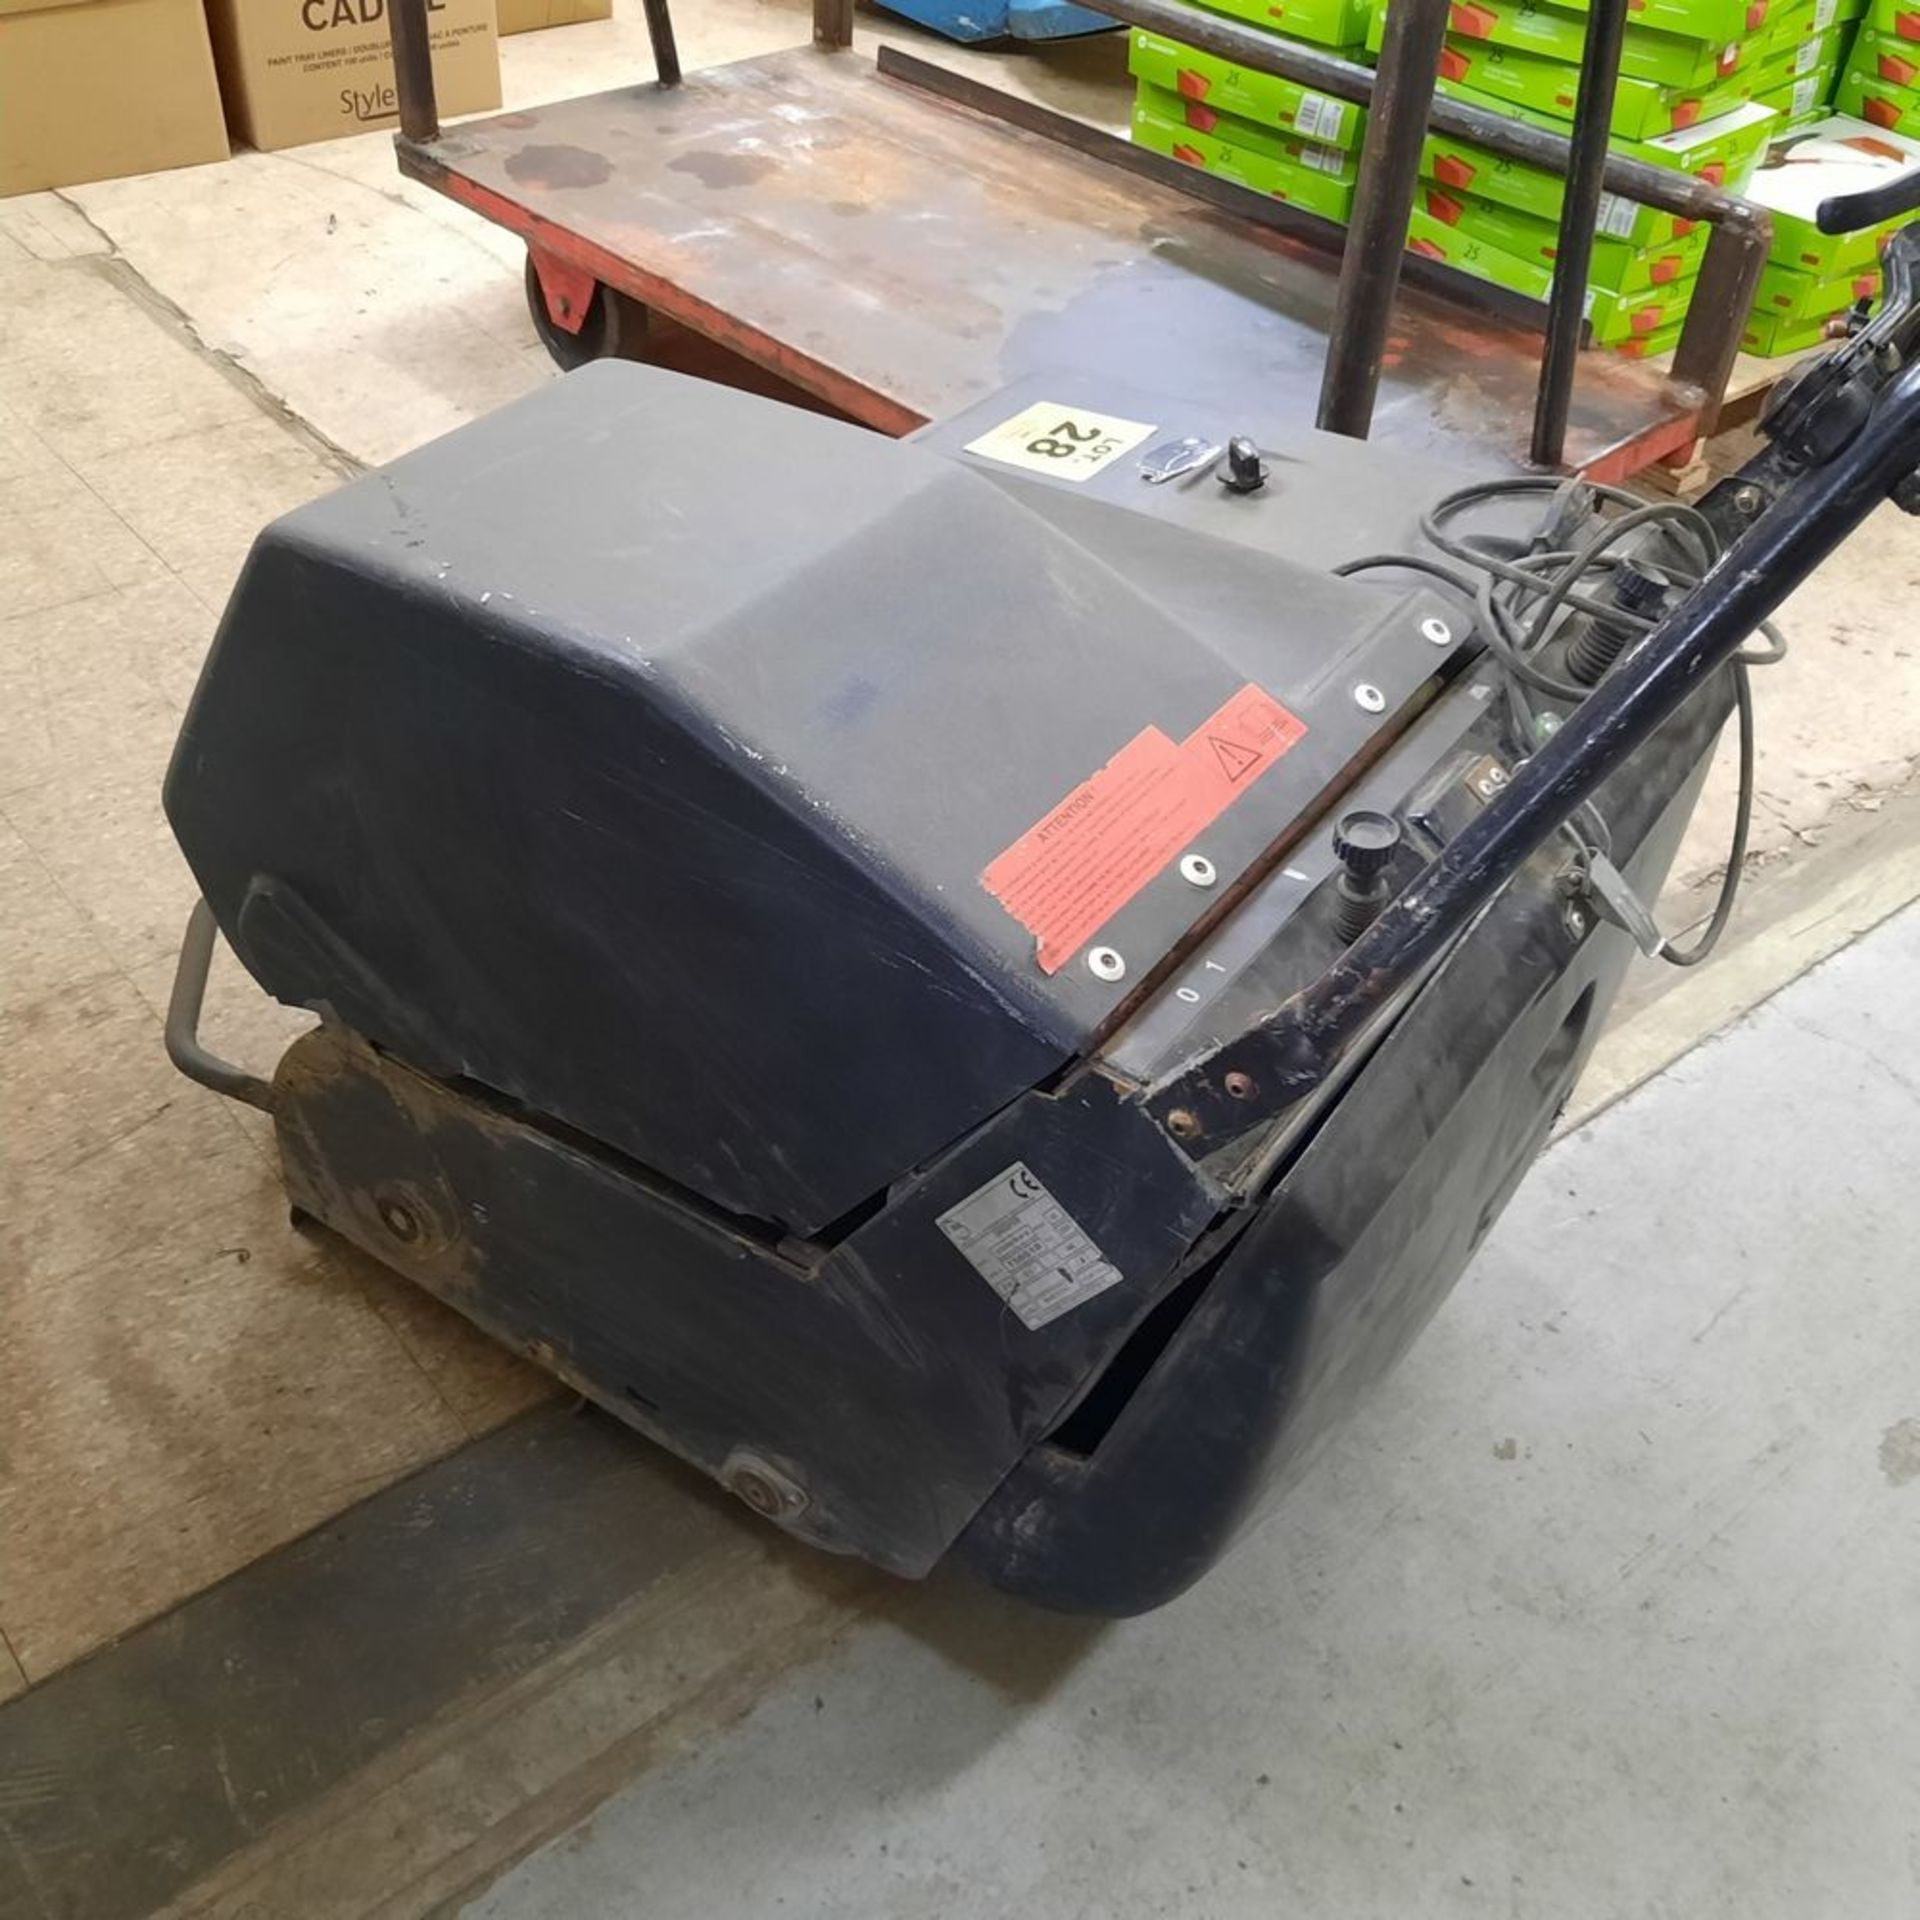 NSS Battery operated Sweeper, mod: Sidewinder BP30, c/w integrated 12 volt Charger - Image 3 of 5